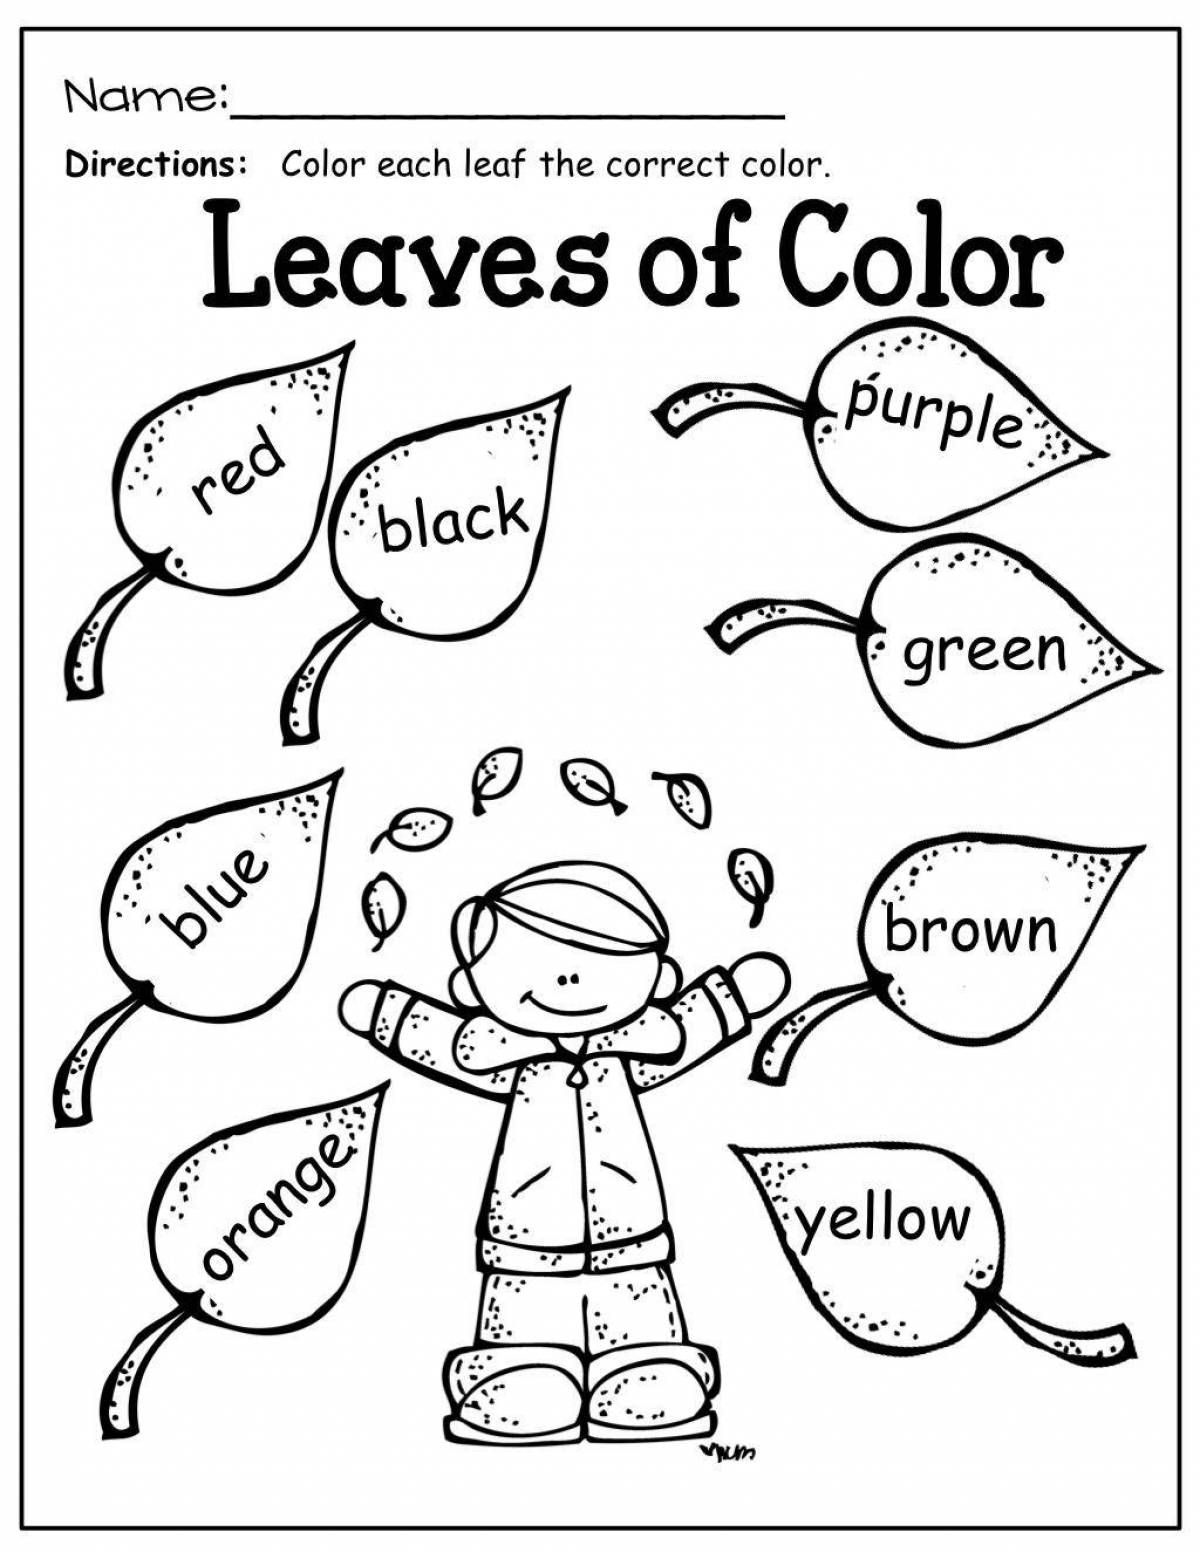 Creative english coloring book for kids